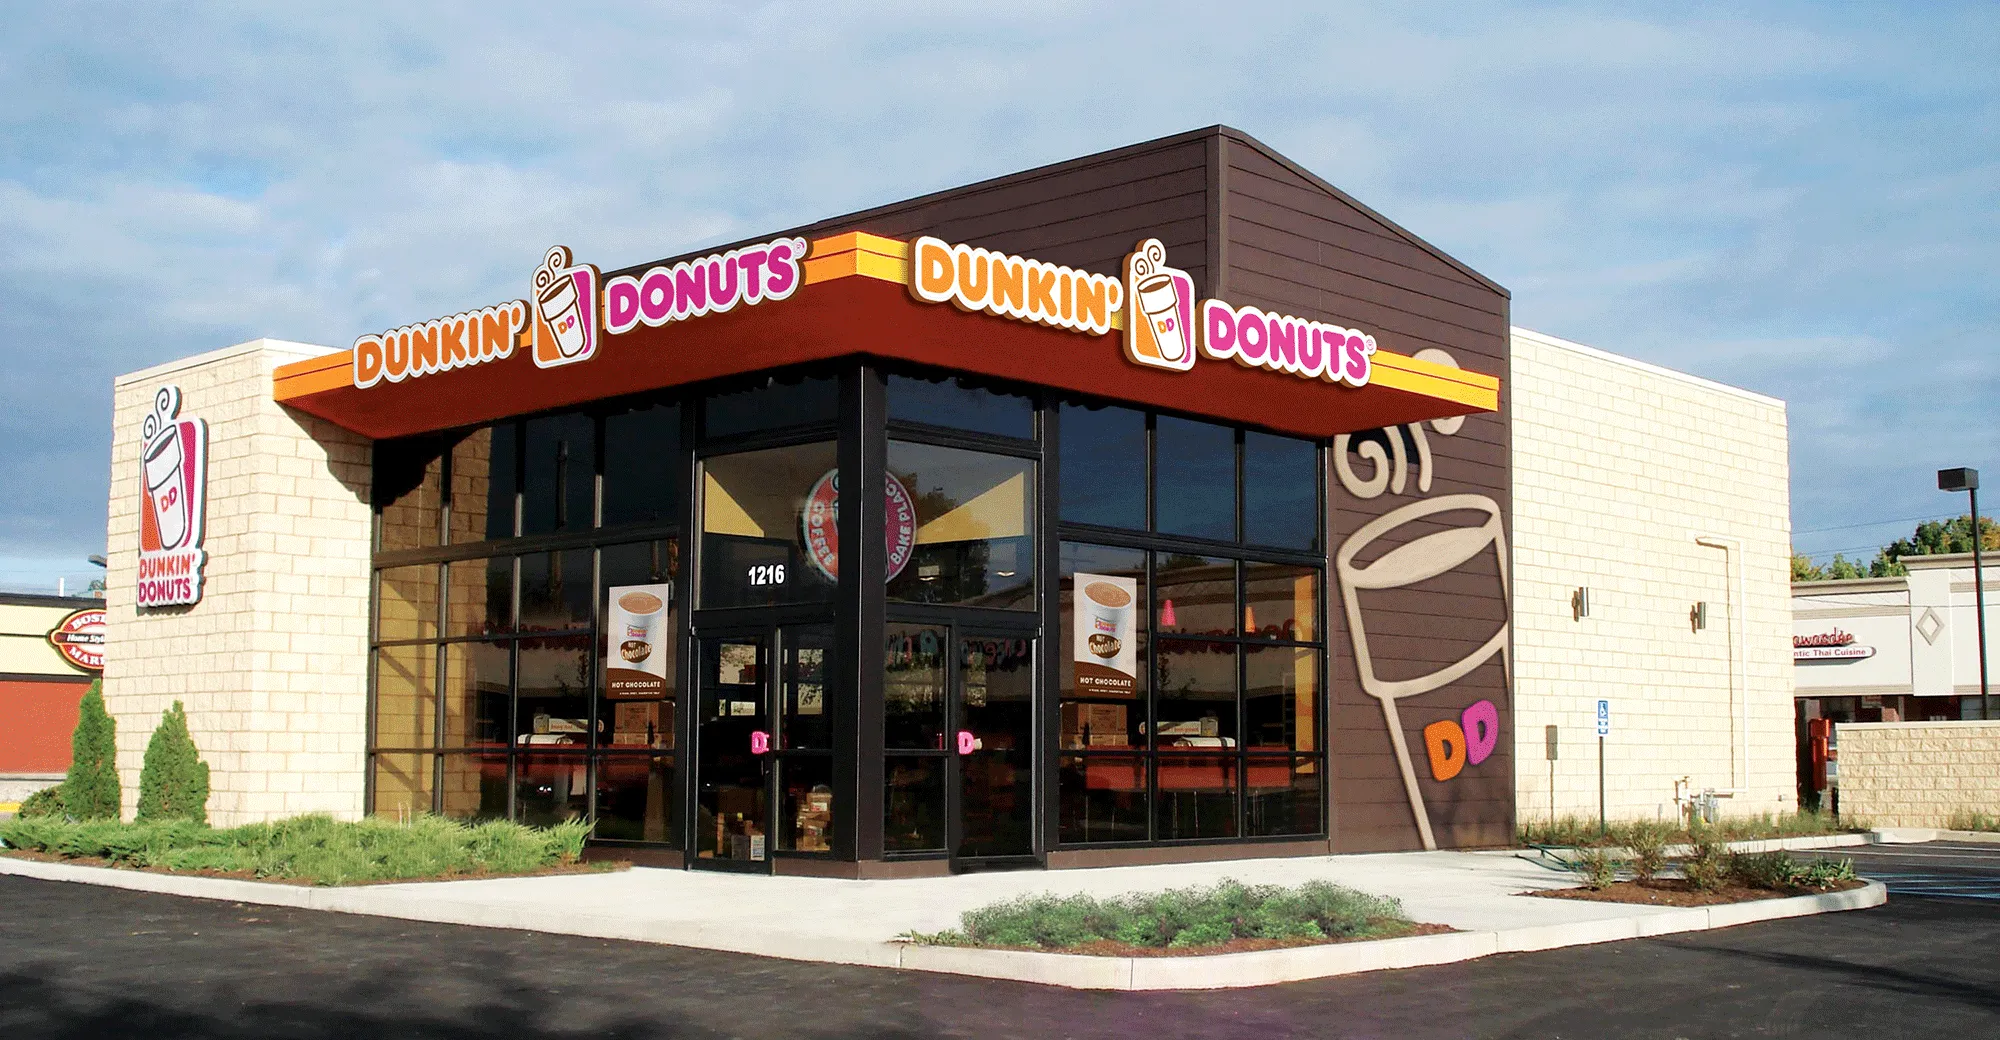 How to Find Dunkin' Donuts Hours Online